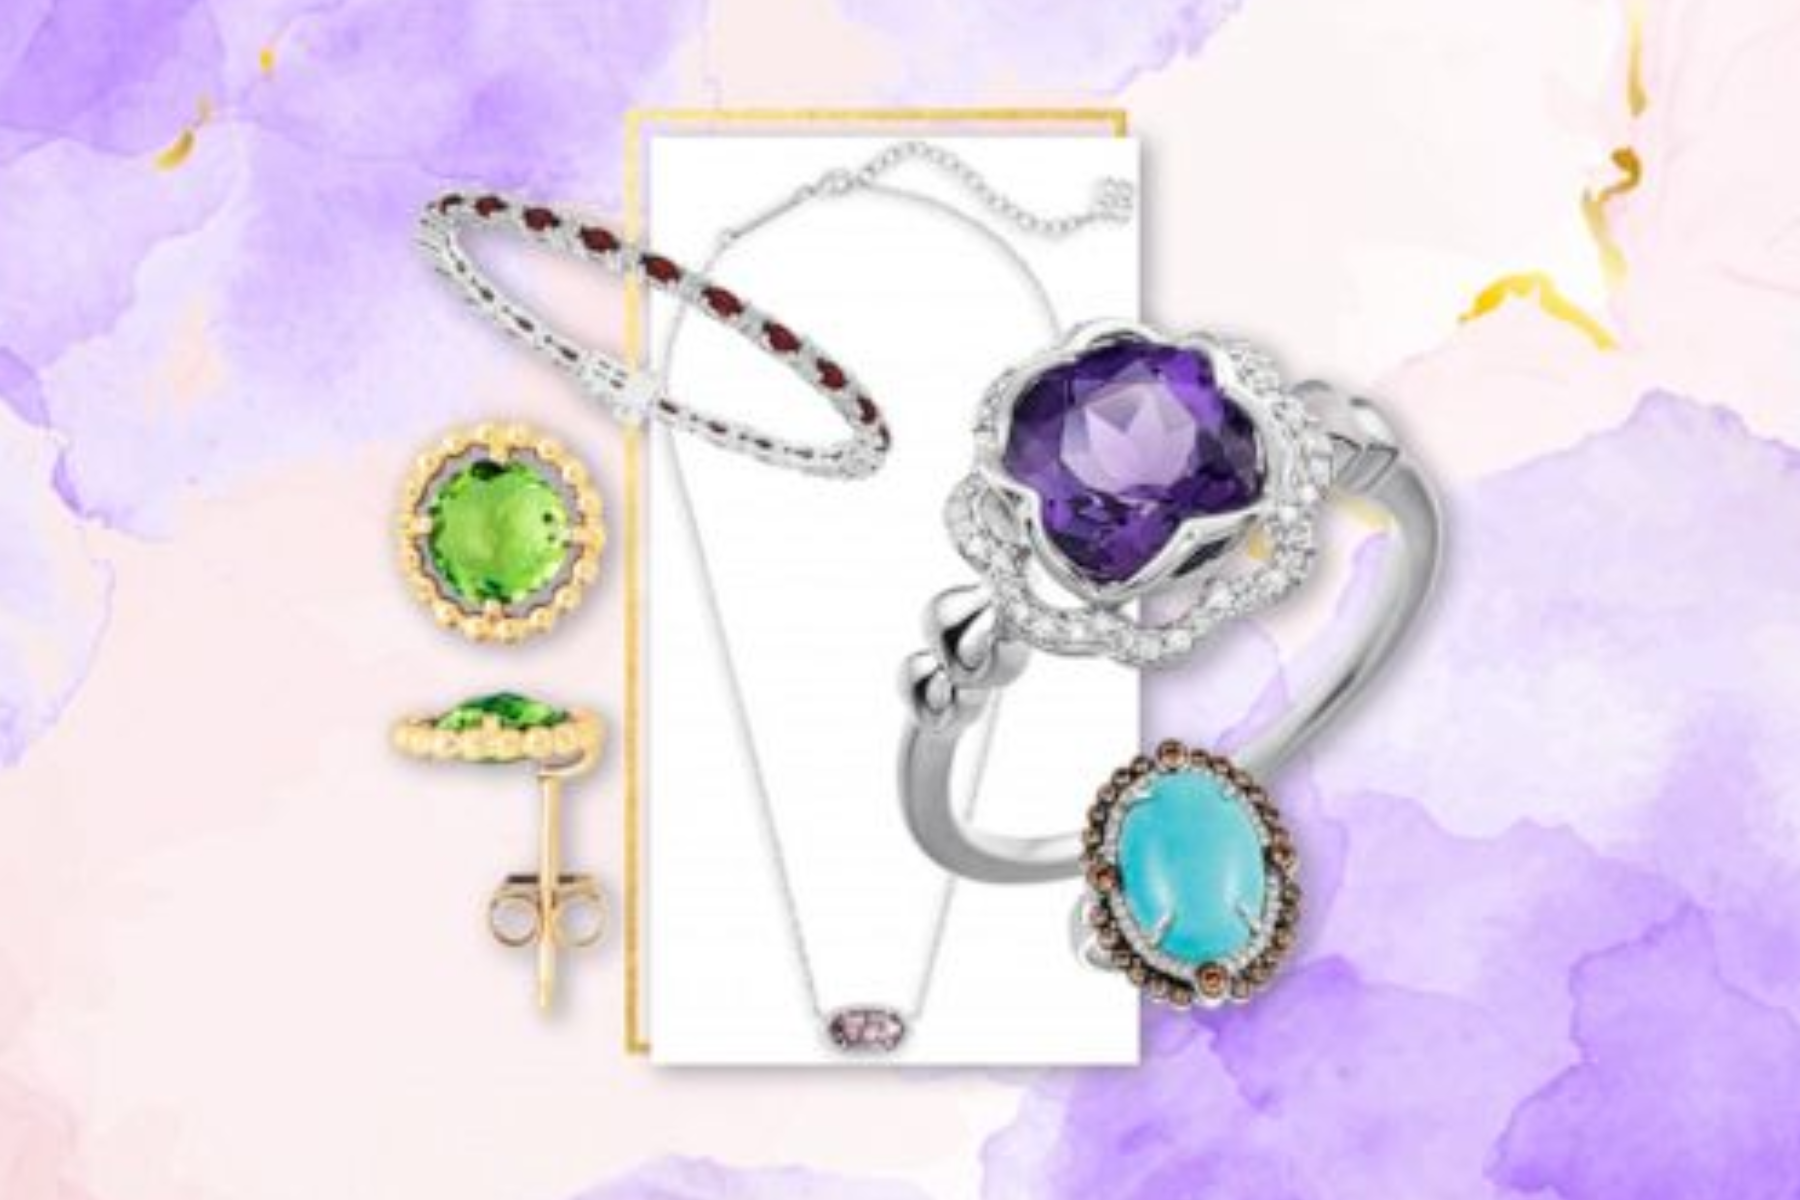 An image of various pieces of jewelry featuring different birthstones